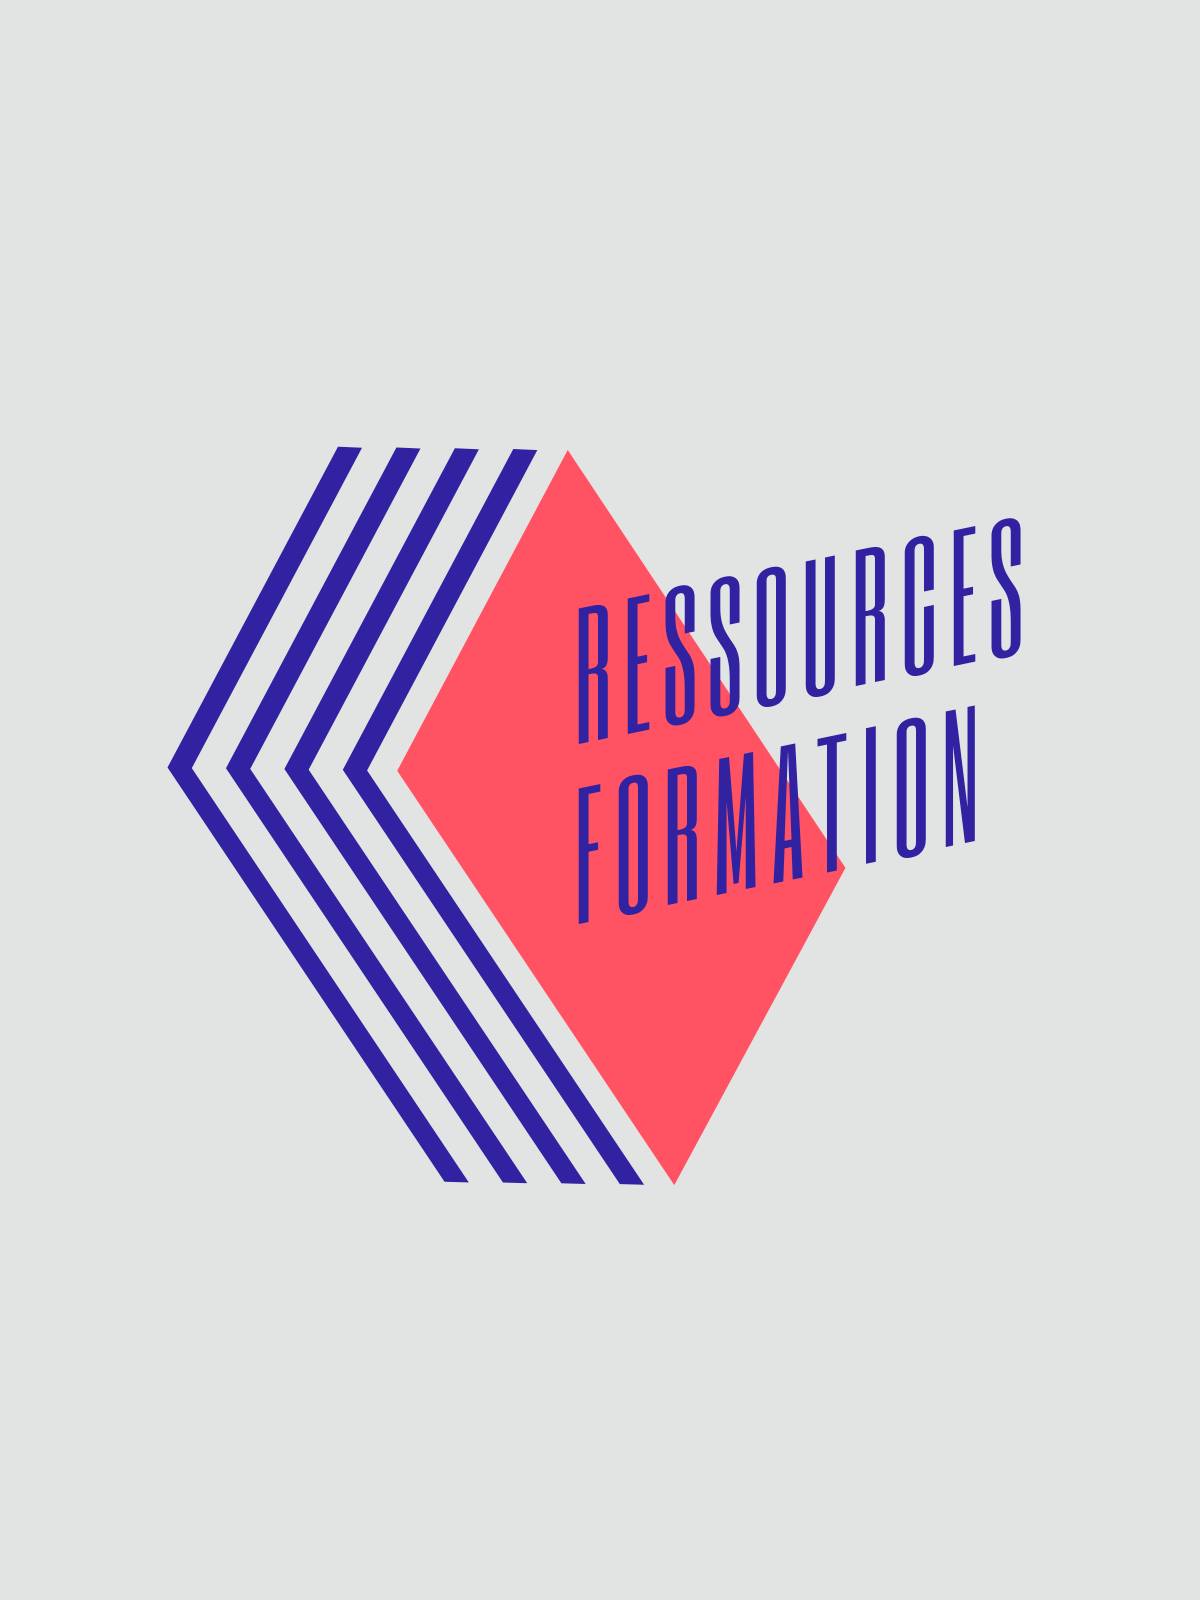 acra_ressources_formation_logos_2.gif